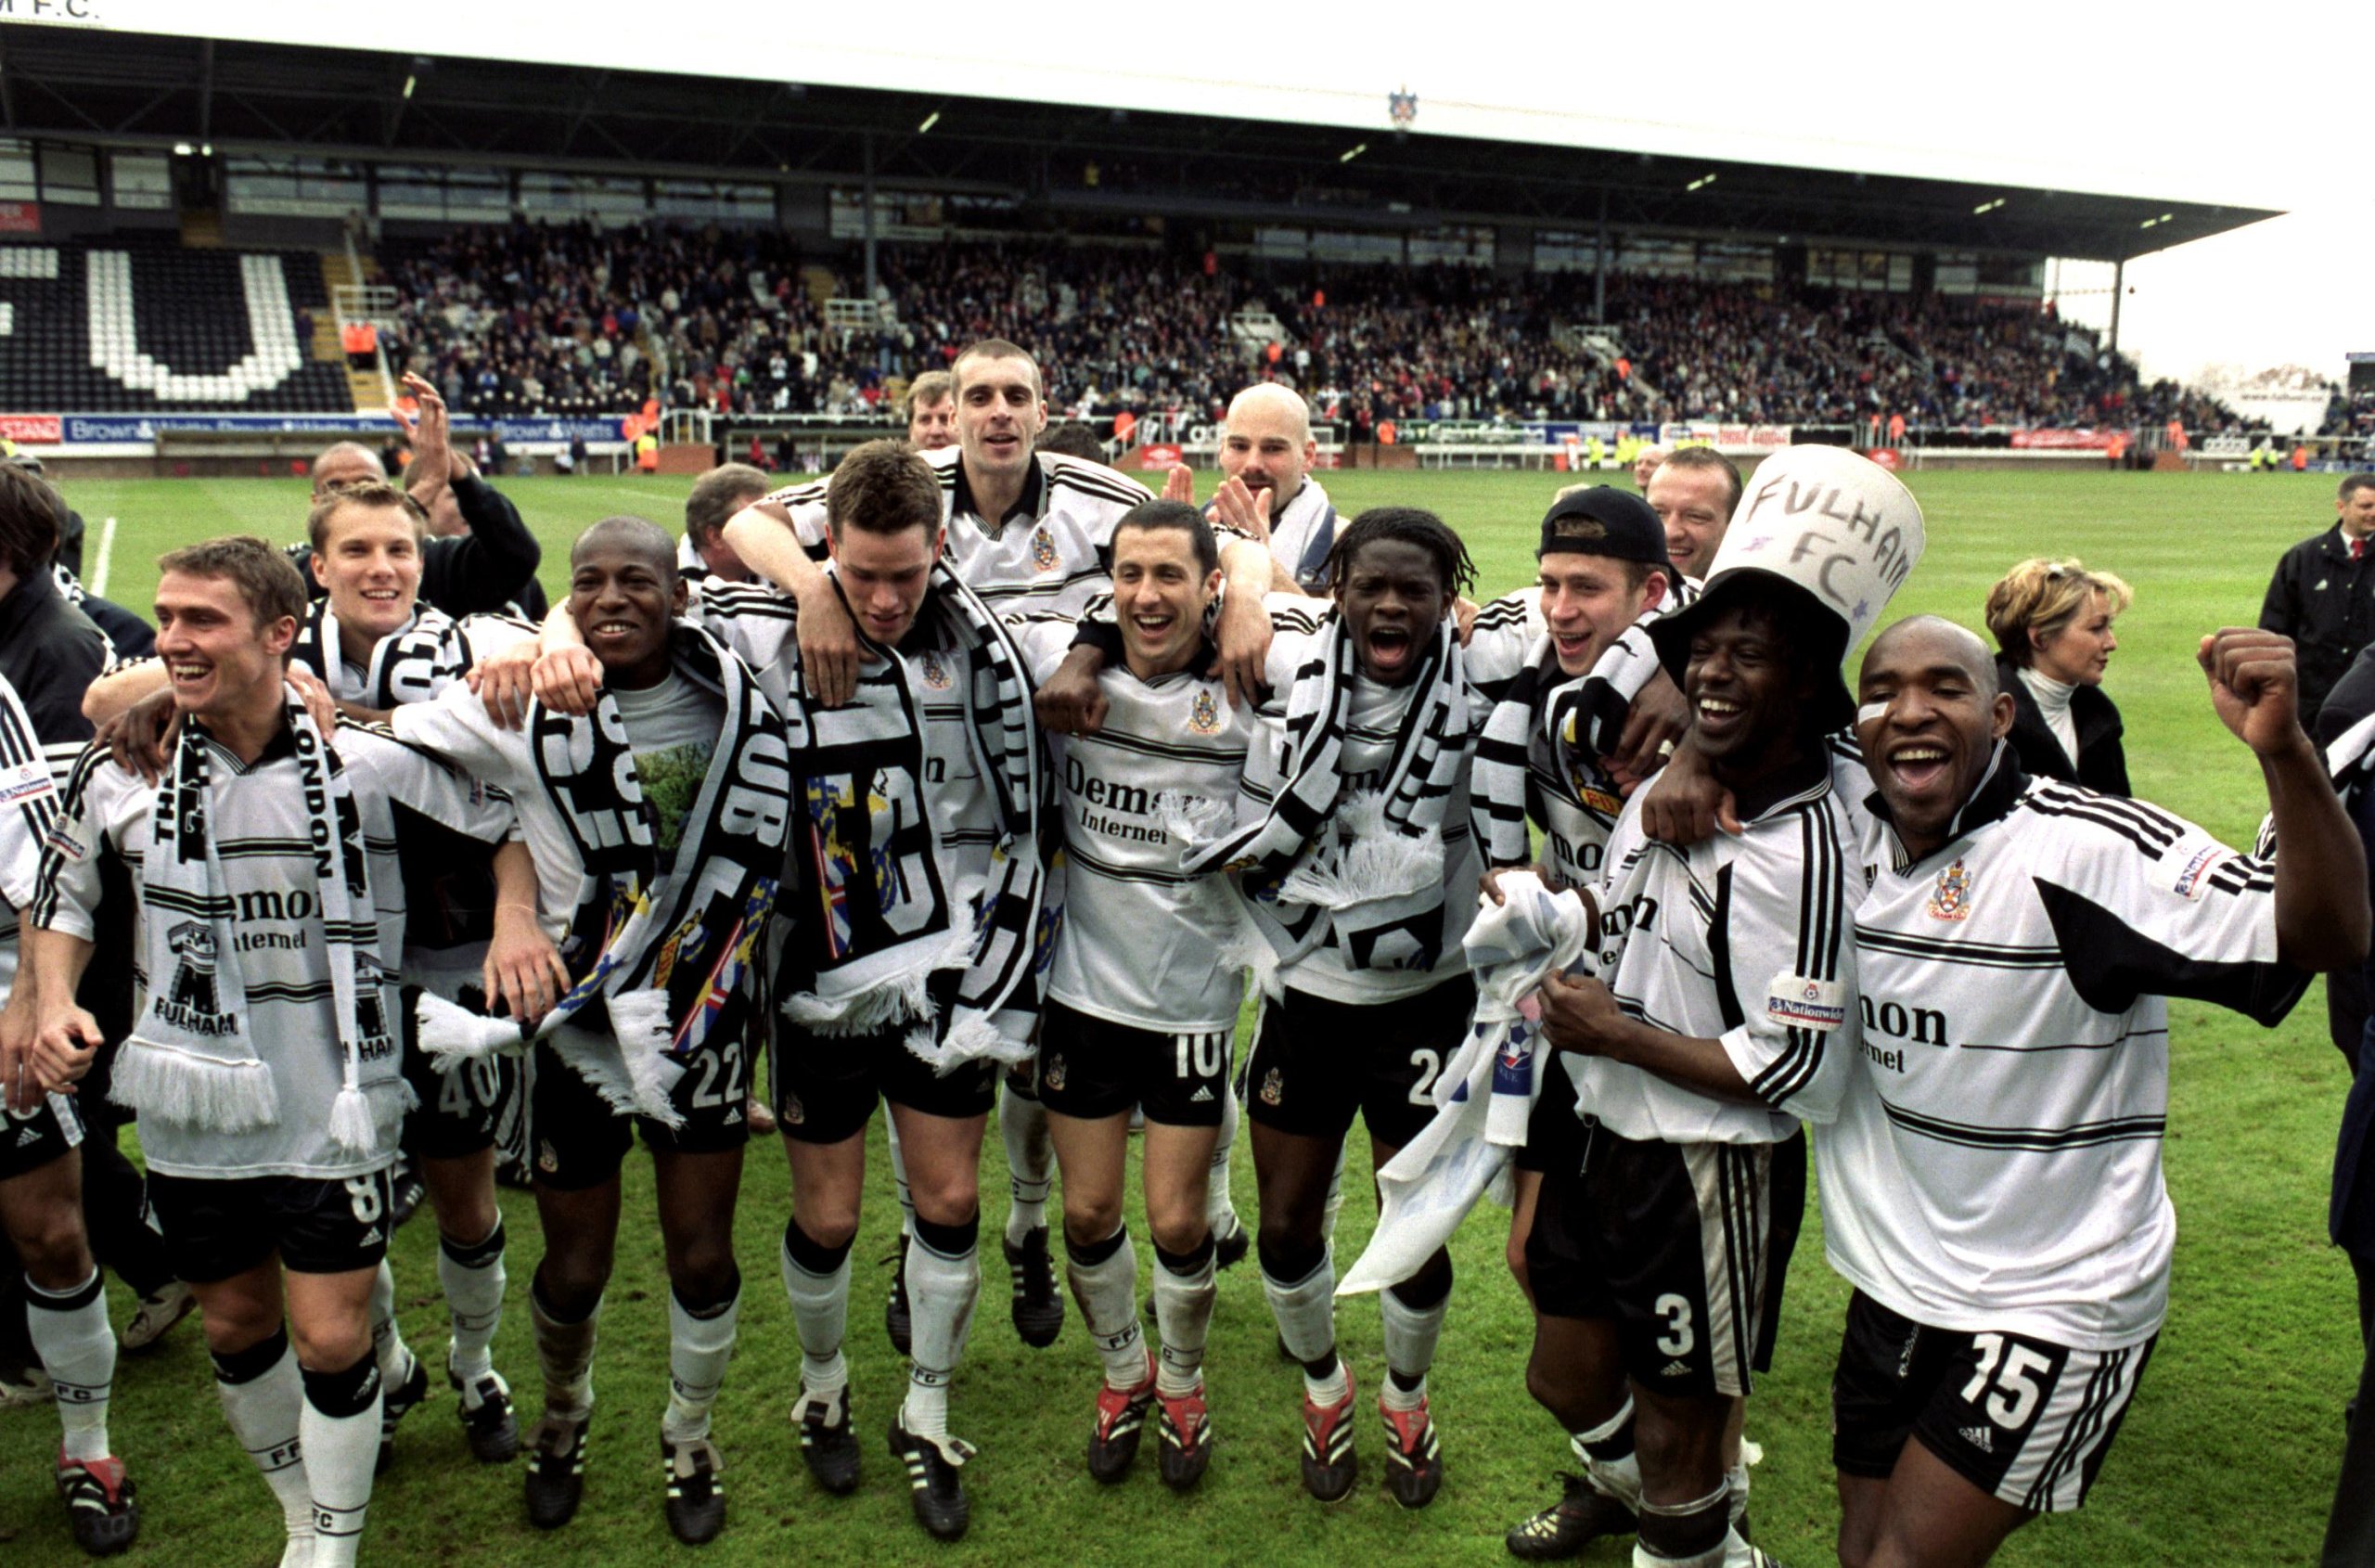 2001: The Fulham club wins the Division One title